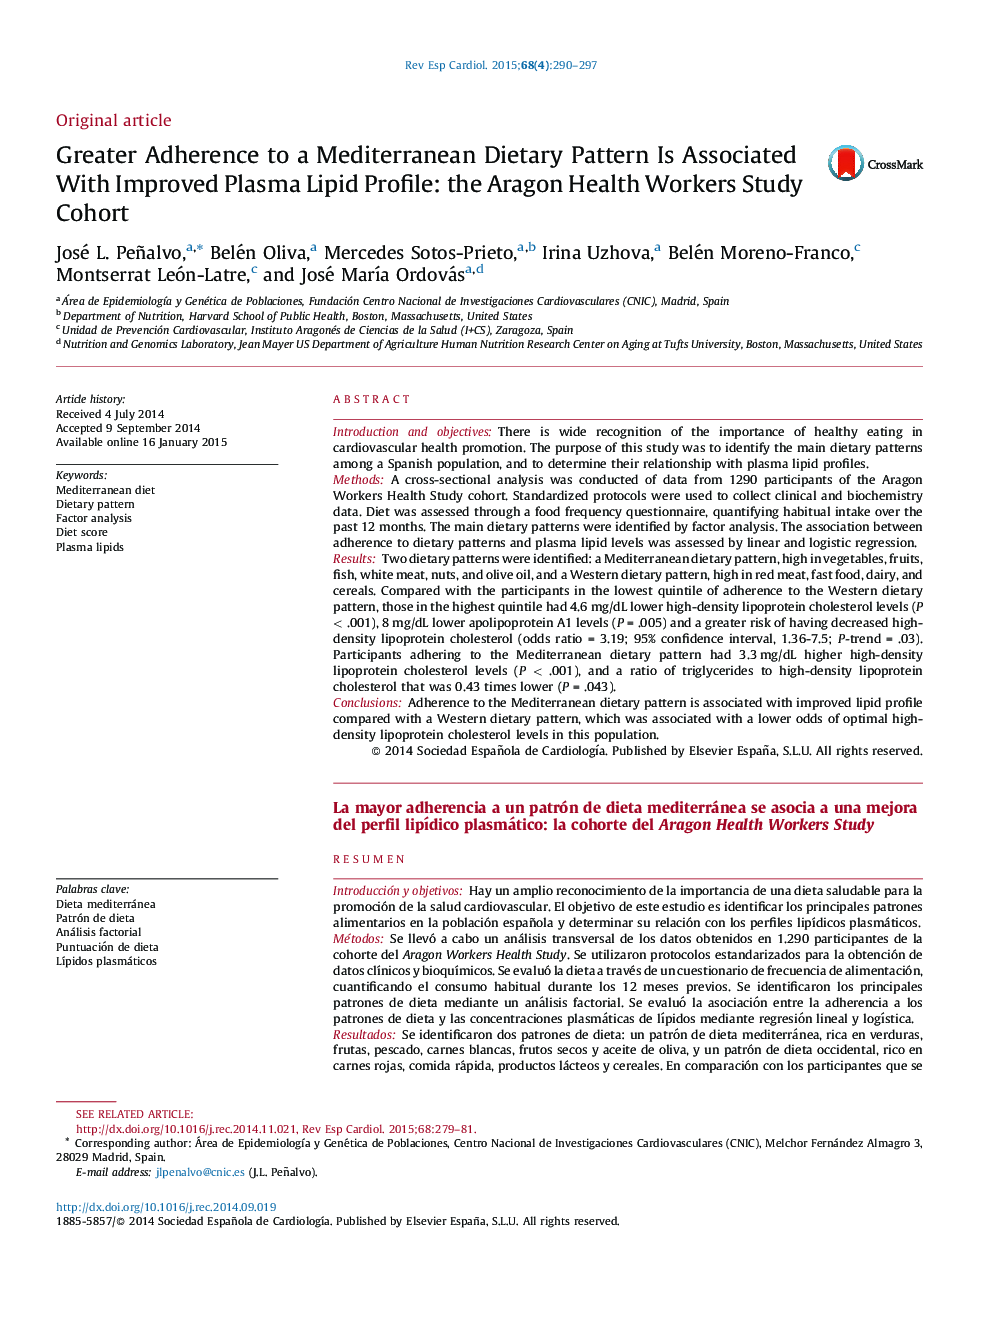 Greater Adherence to a Mediterranean Dietary Pattern Is Associated With Improved Plasma Lipid Profile: the Aragon Health Workers Study Cohort